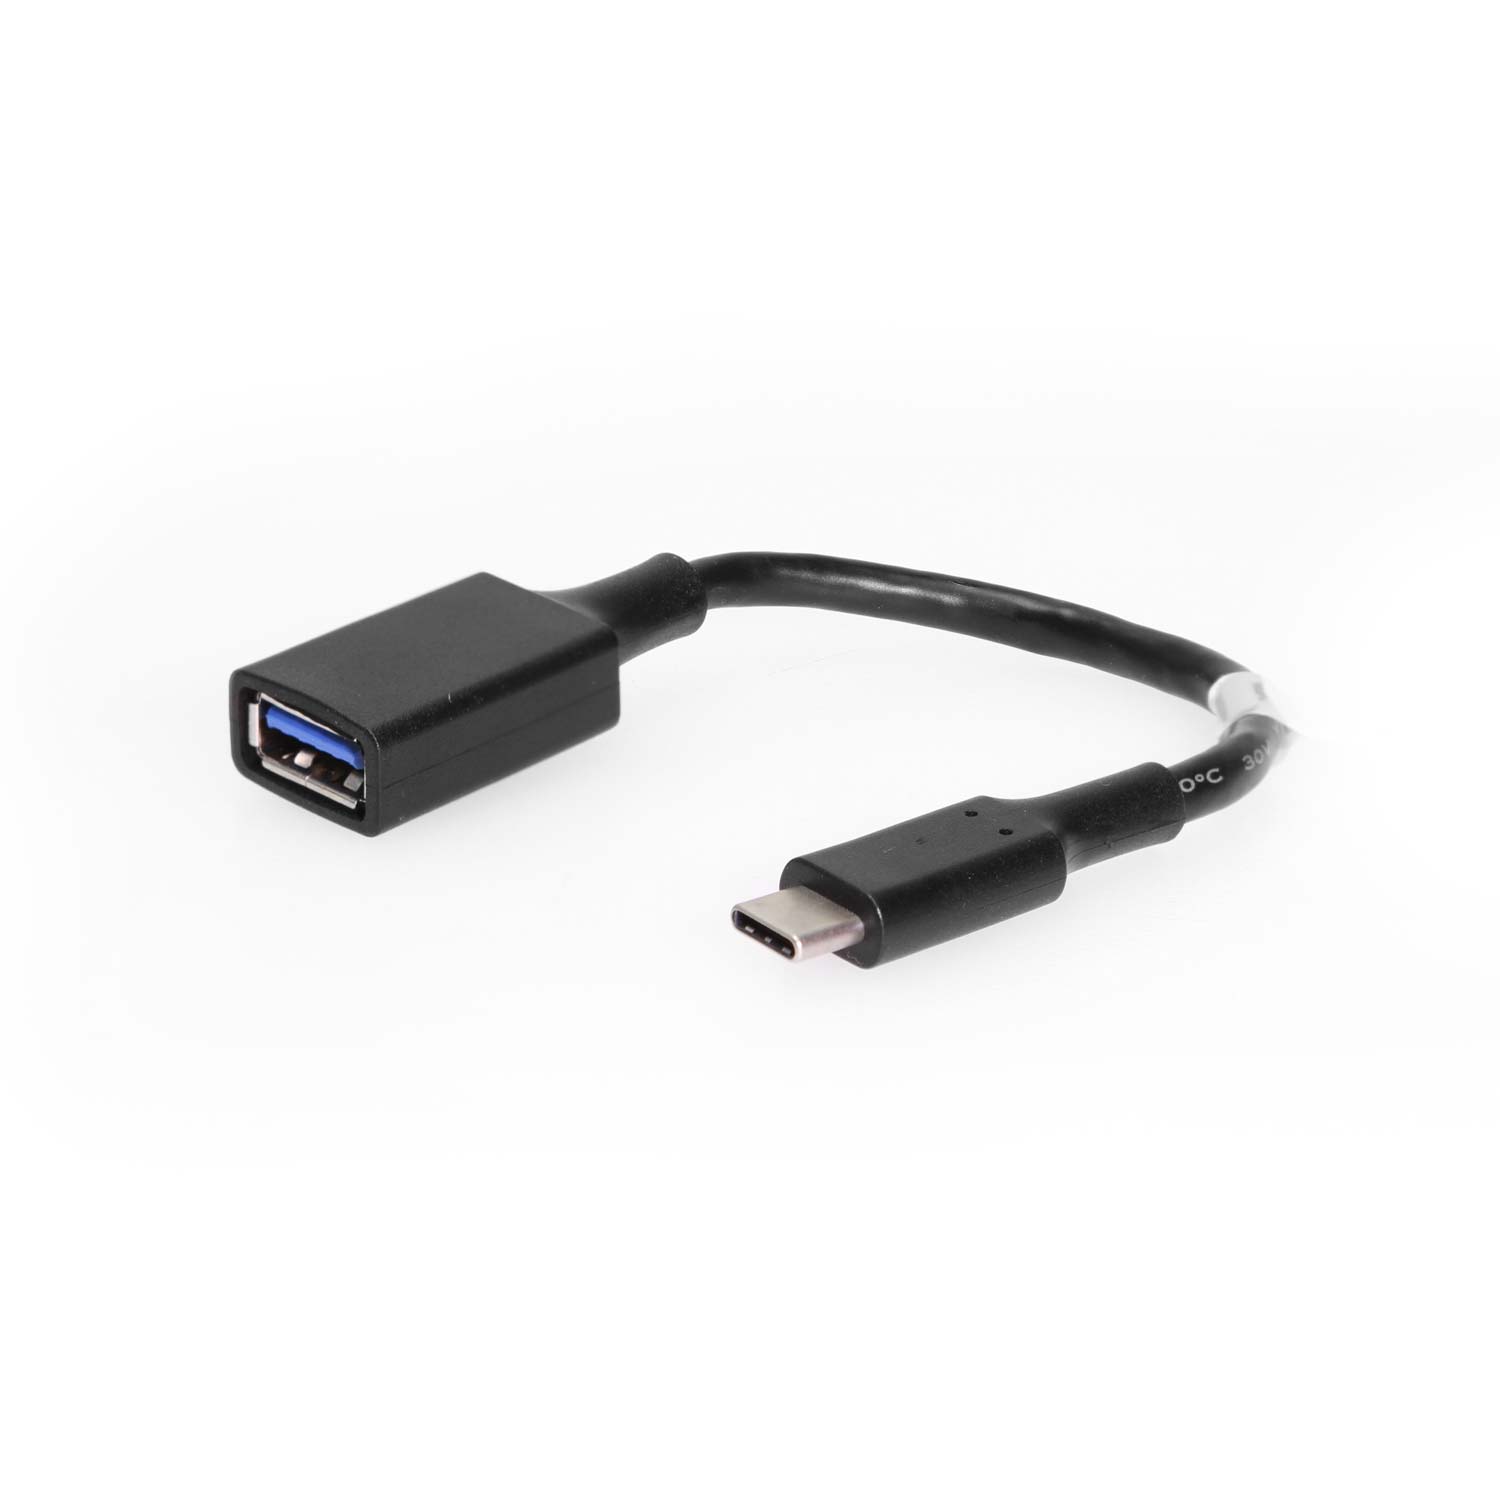 Complaciente Plausible Interesar USB 3.2 Gen 1 Type-C Male to Type-A Female Adapter Cable 6in. - Coolgear